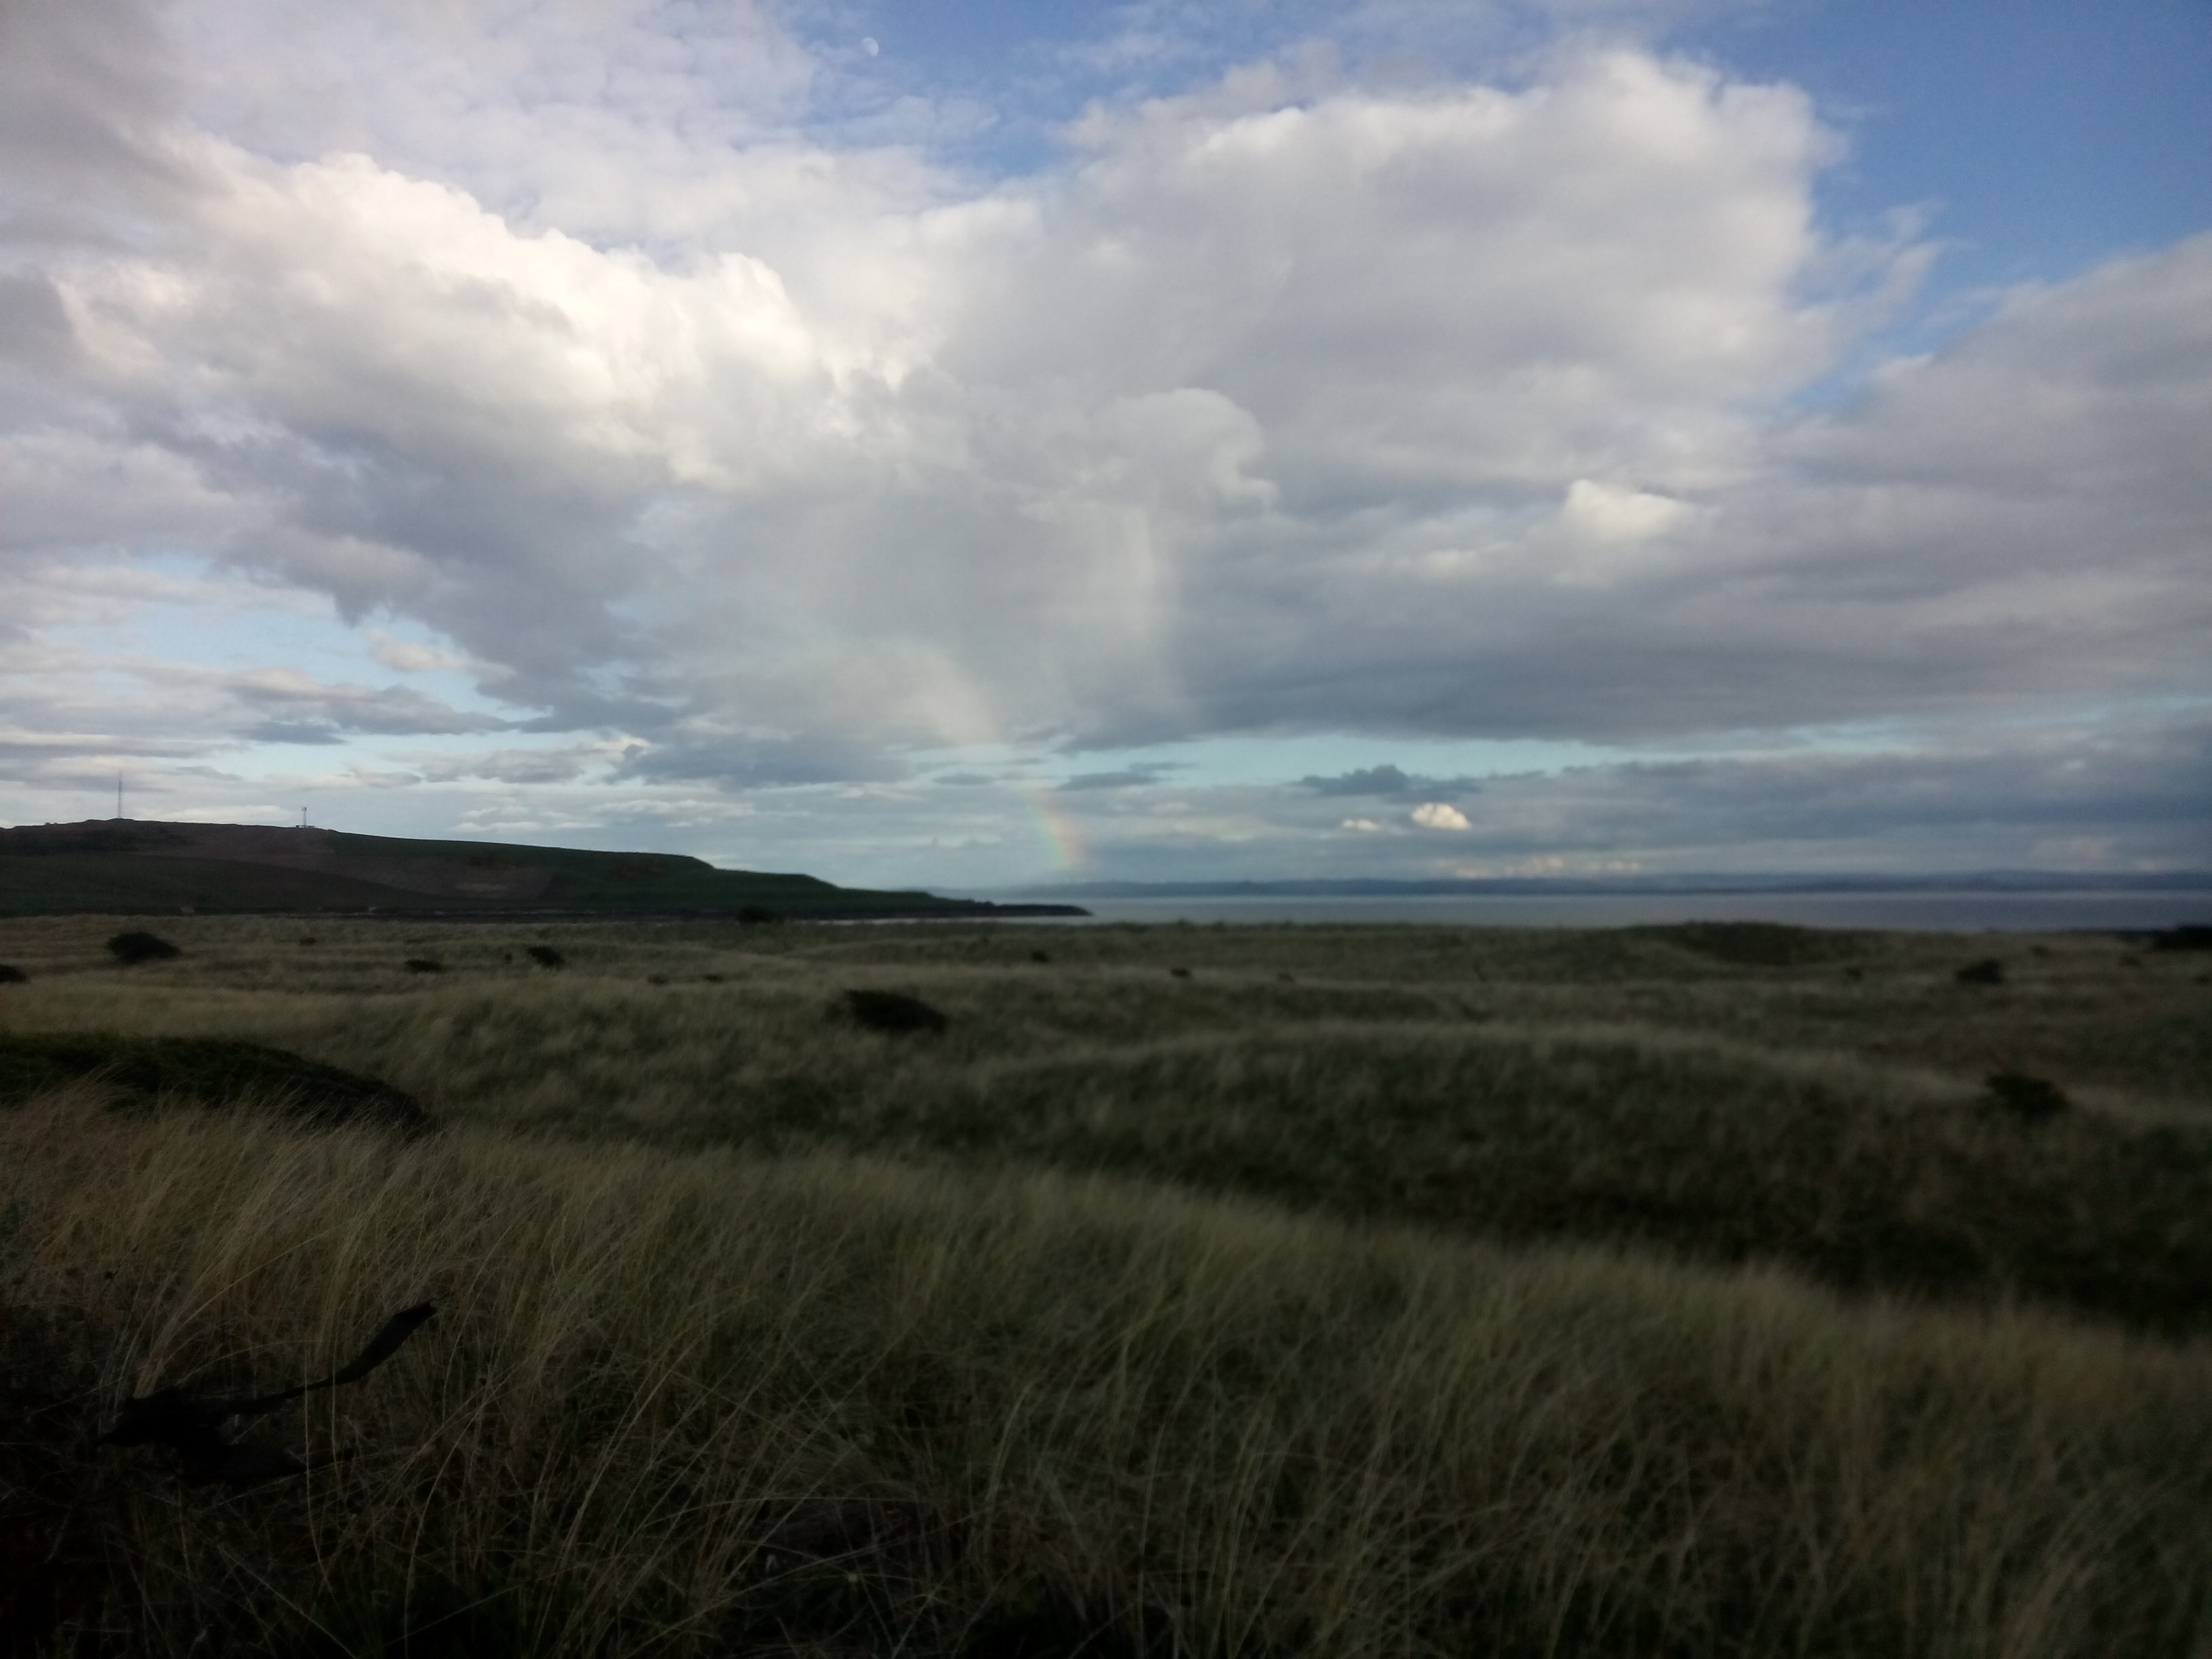 A view across grassy dunes to the sea, where a small rainbow pours down from fluffy clouds